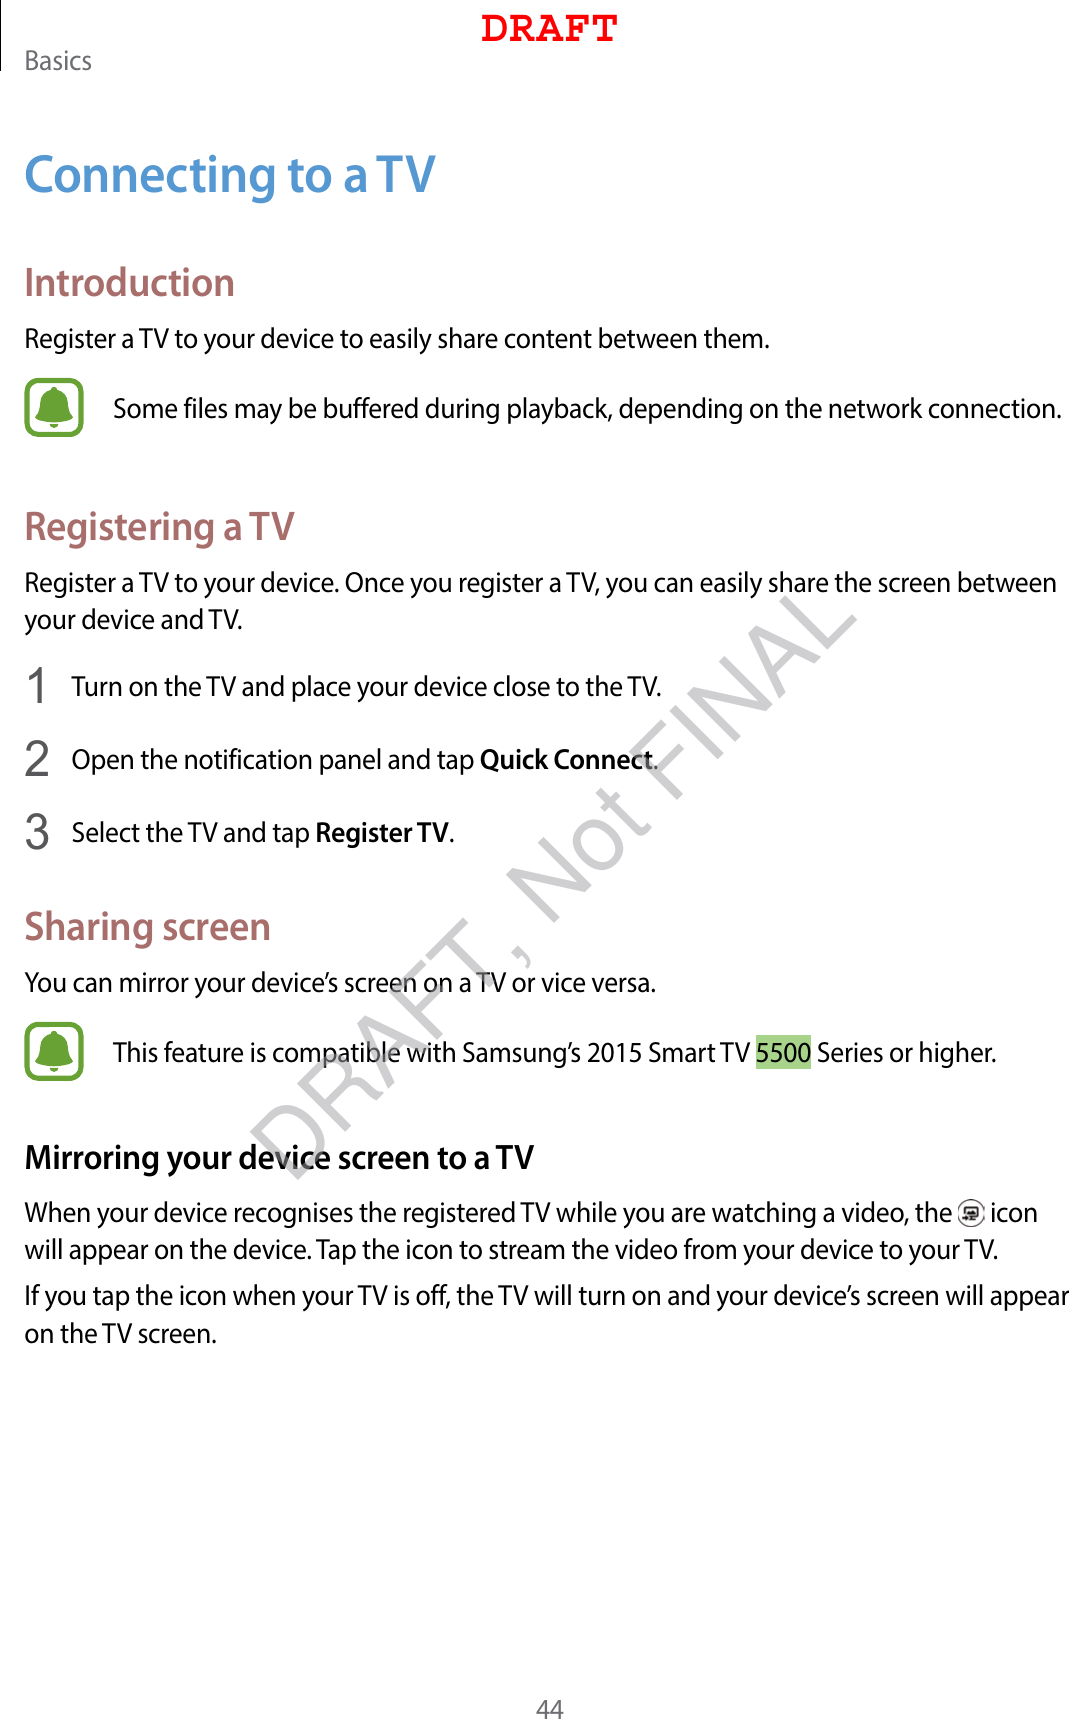 Basics44Connecting to a TVIntroductionRegister a TV to your device to easily share content between them.Some files may be buffered during playback, depending on the network connection.Registering a TVRegister a TV to your device. Once you register a TV, you can easily share the screen between your device and TV.1  Turn on the TV and place your device close to the TV.2  Open the notification panel and tap Quick Connect.3  Select the TV and tap Register TV.Sharing screenYou can mirror your device’s screen on a TV or vice versa.This feature is compatible with Samsung’s 2015 Smart TV 5500 Series or higher.Mirroring your device screen to a TVWhen your device recognises the registered TV while you are watching a video, the   icon will appear on the device. Tap the icon to stream the video from your device to your TV.If you tap the icon when your TV is off, the TV will turn on and your device’s screen will appear on the TV screen.DRAFTDRAFT, Not FINAL